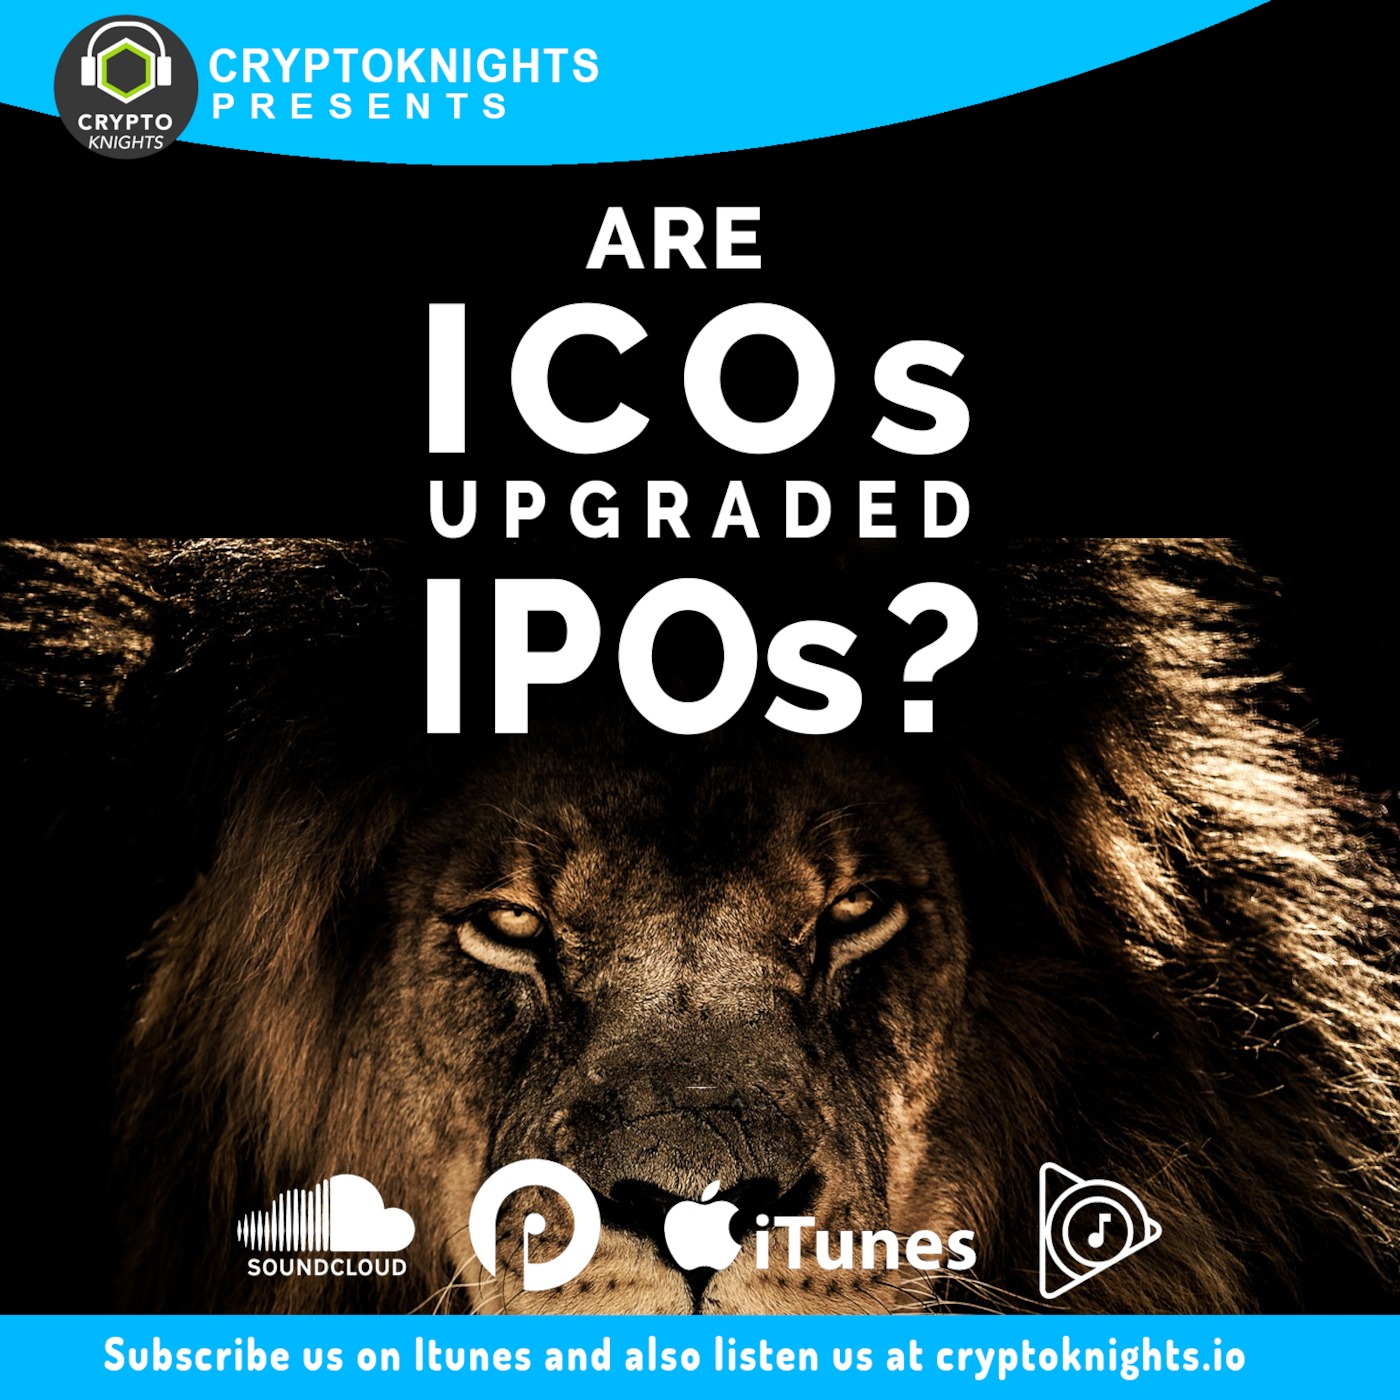 Are ICOs upgraded IPOs?